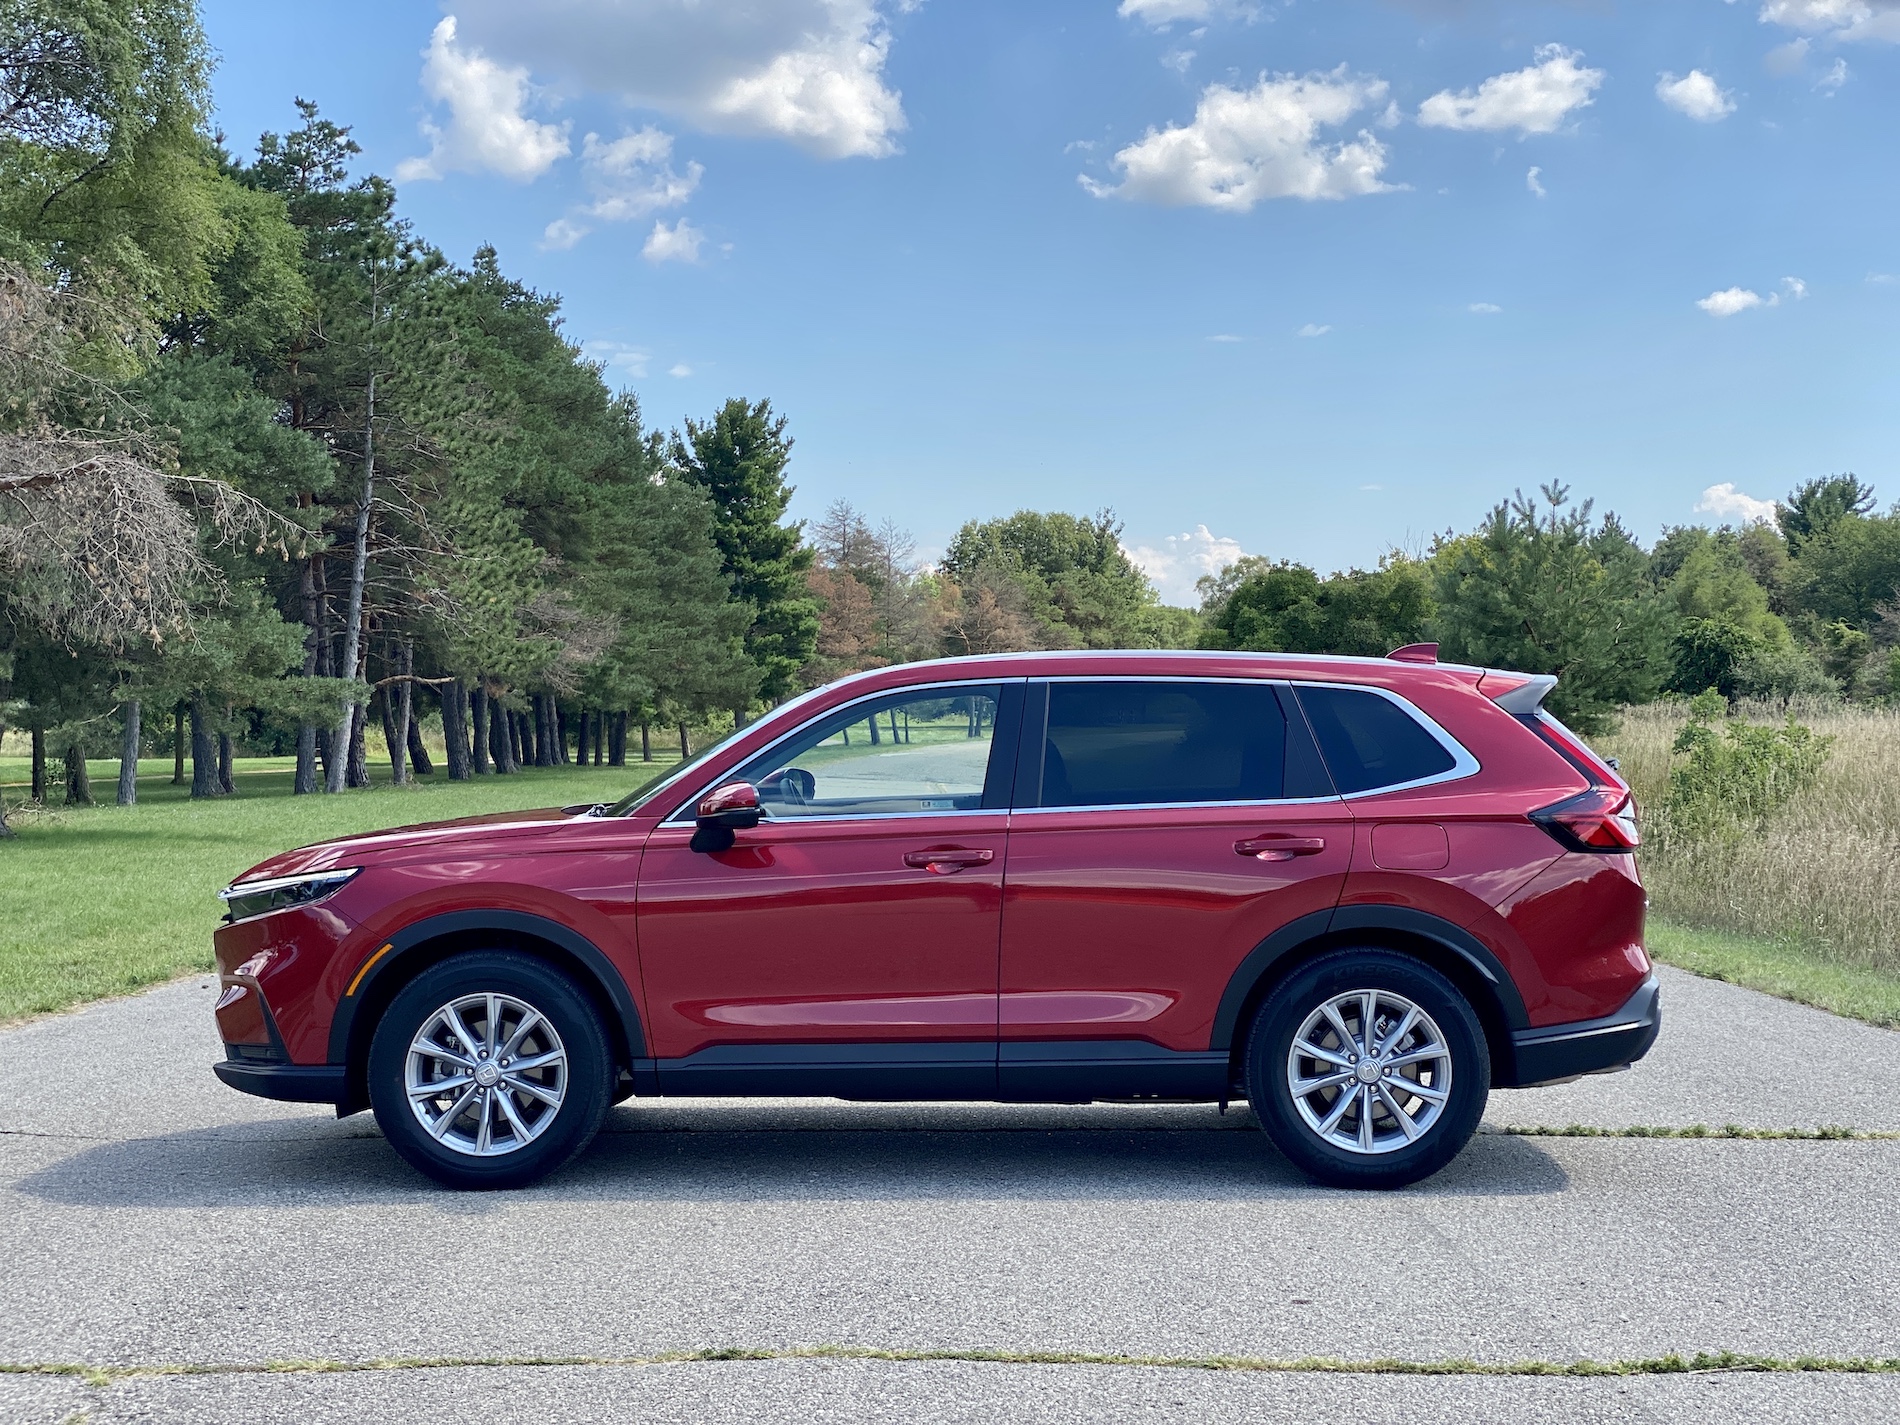 2023 Honda CR V Starts At $355; Hybrid Costs $650 More And Gets 40 Mpg Combined